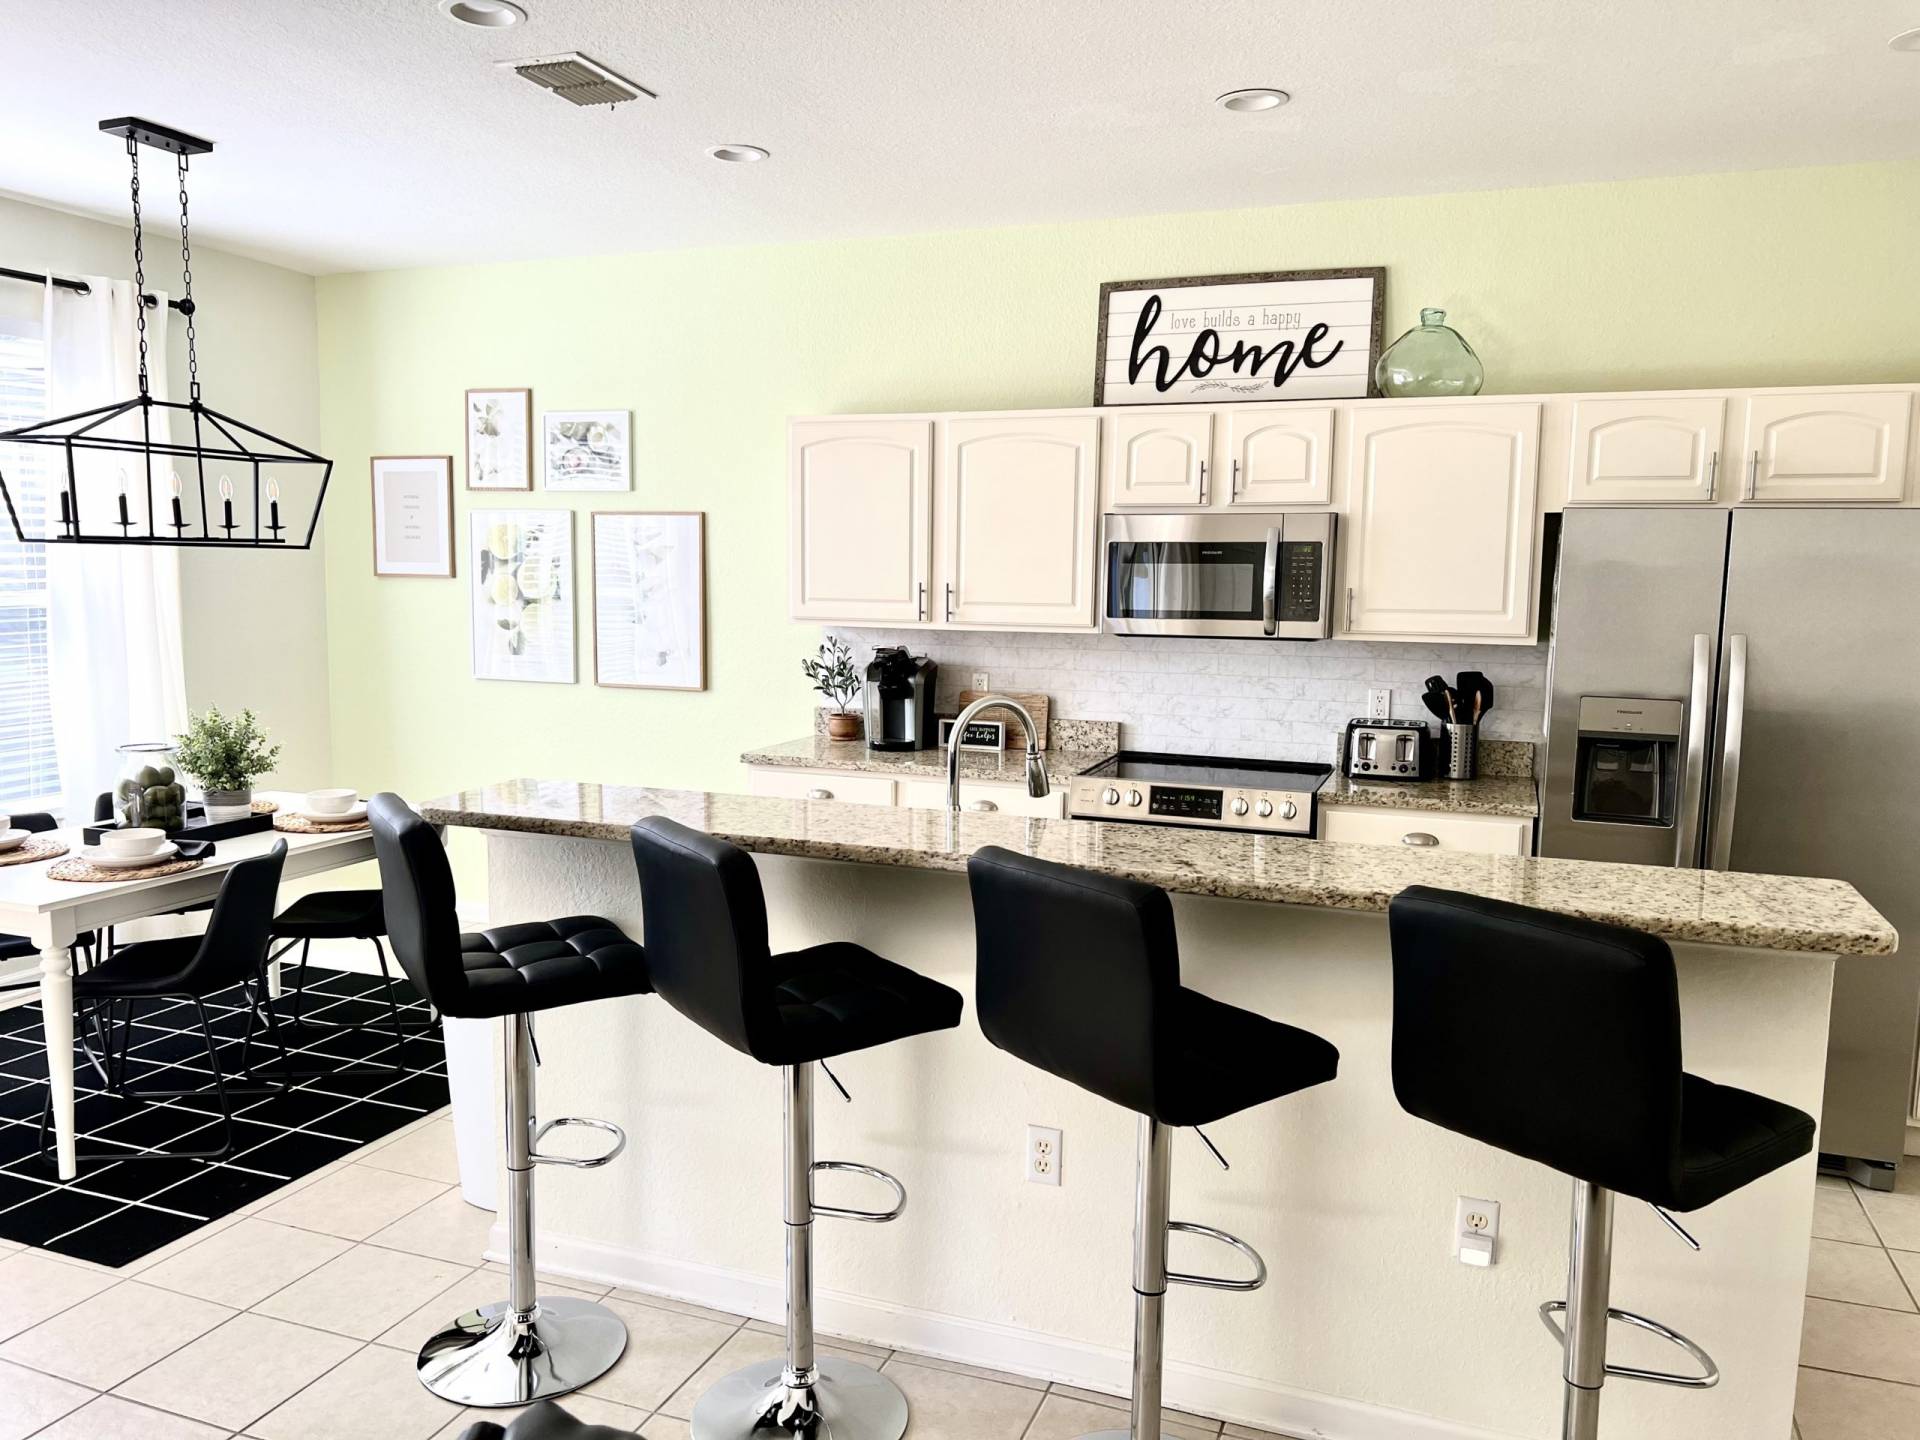 Memory Lane Villa Vacation Rental Home in Windsor Hills Florida Kitchen with Barstools and Dining Nook